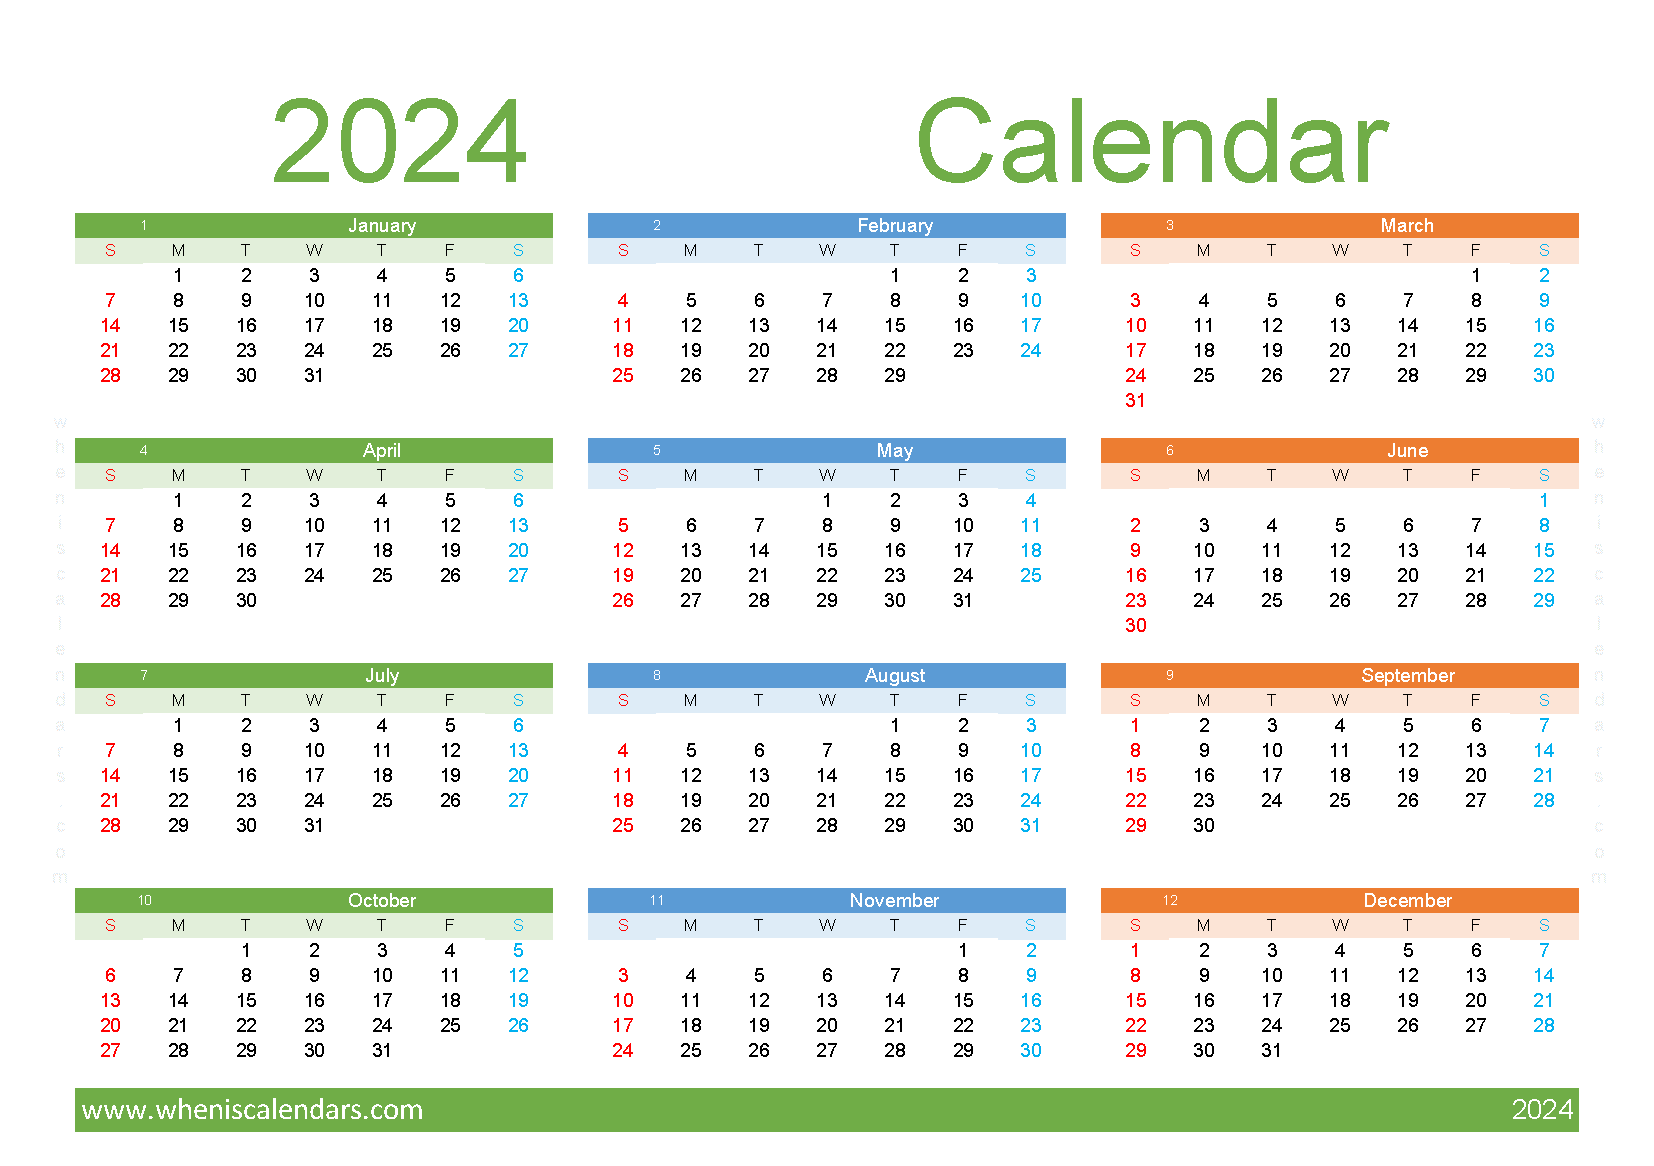 free Calendar 2024 with holidays printable A5 in Horizontal landscape colorful design